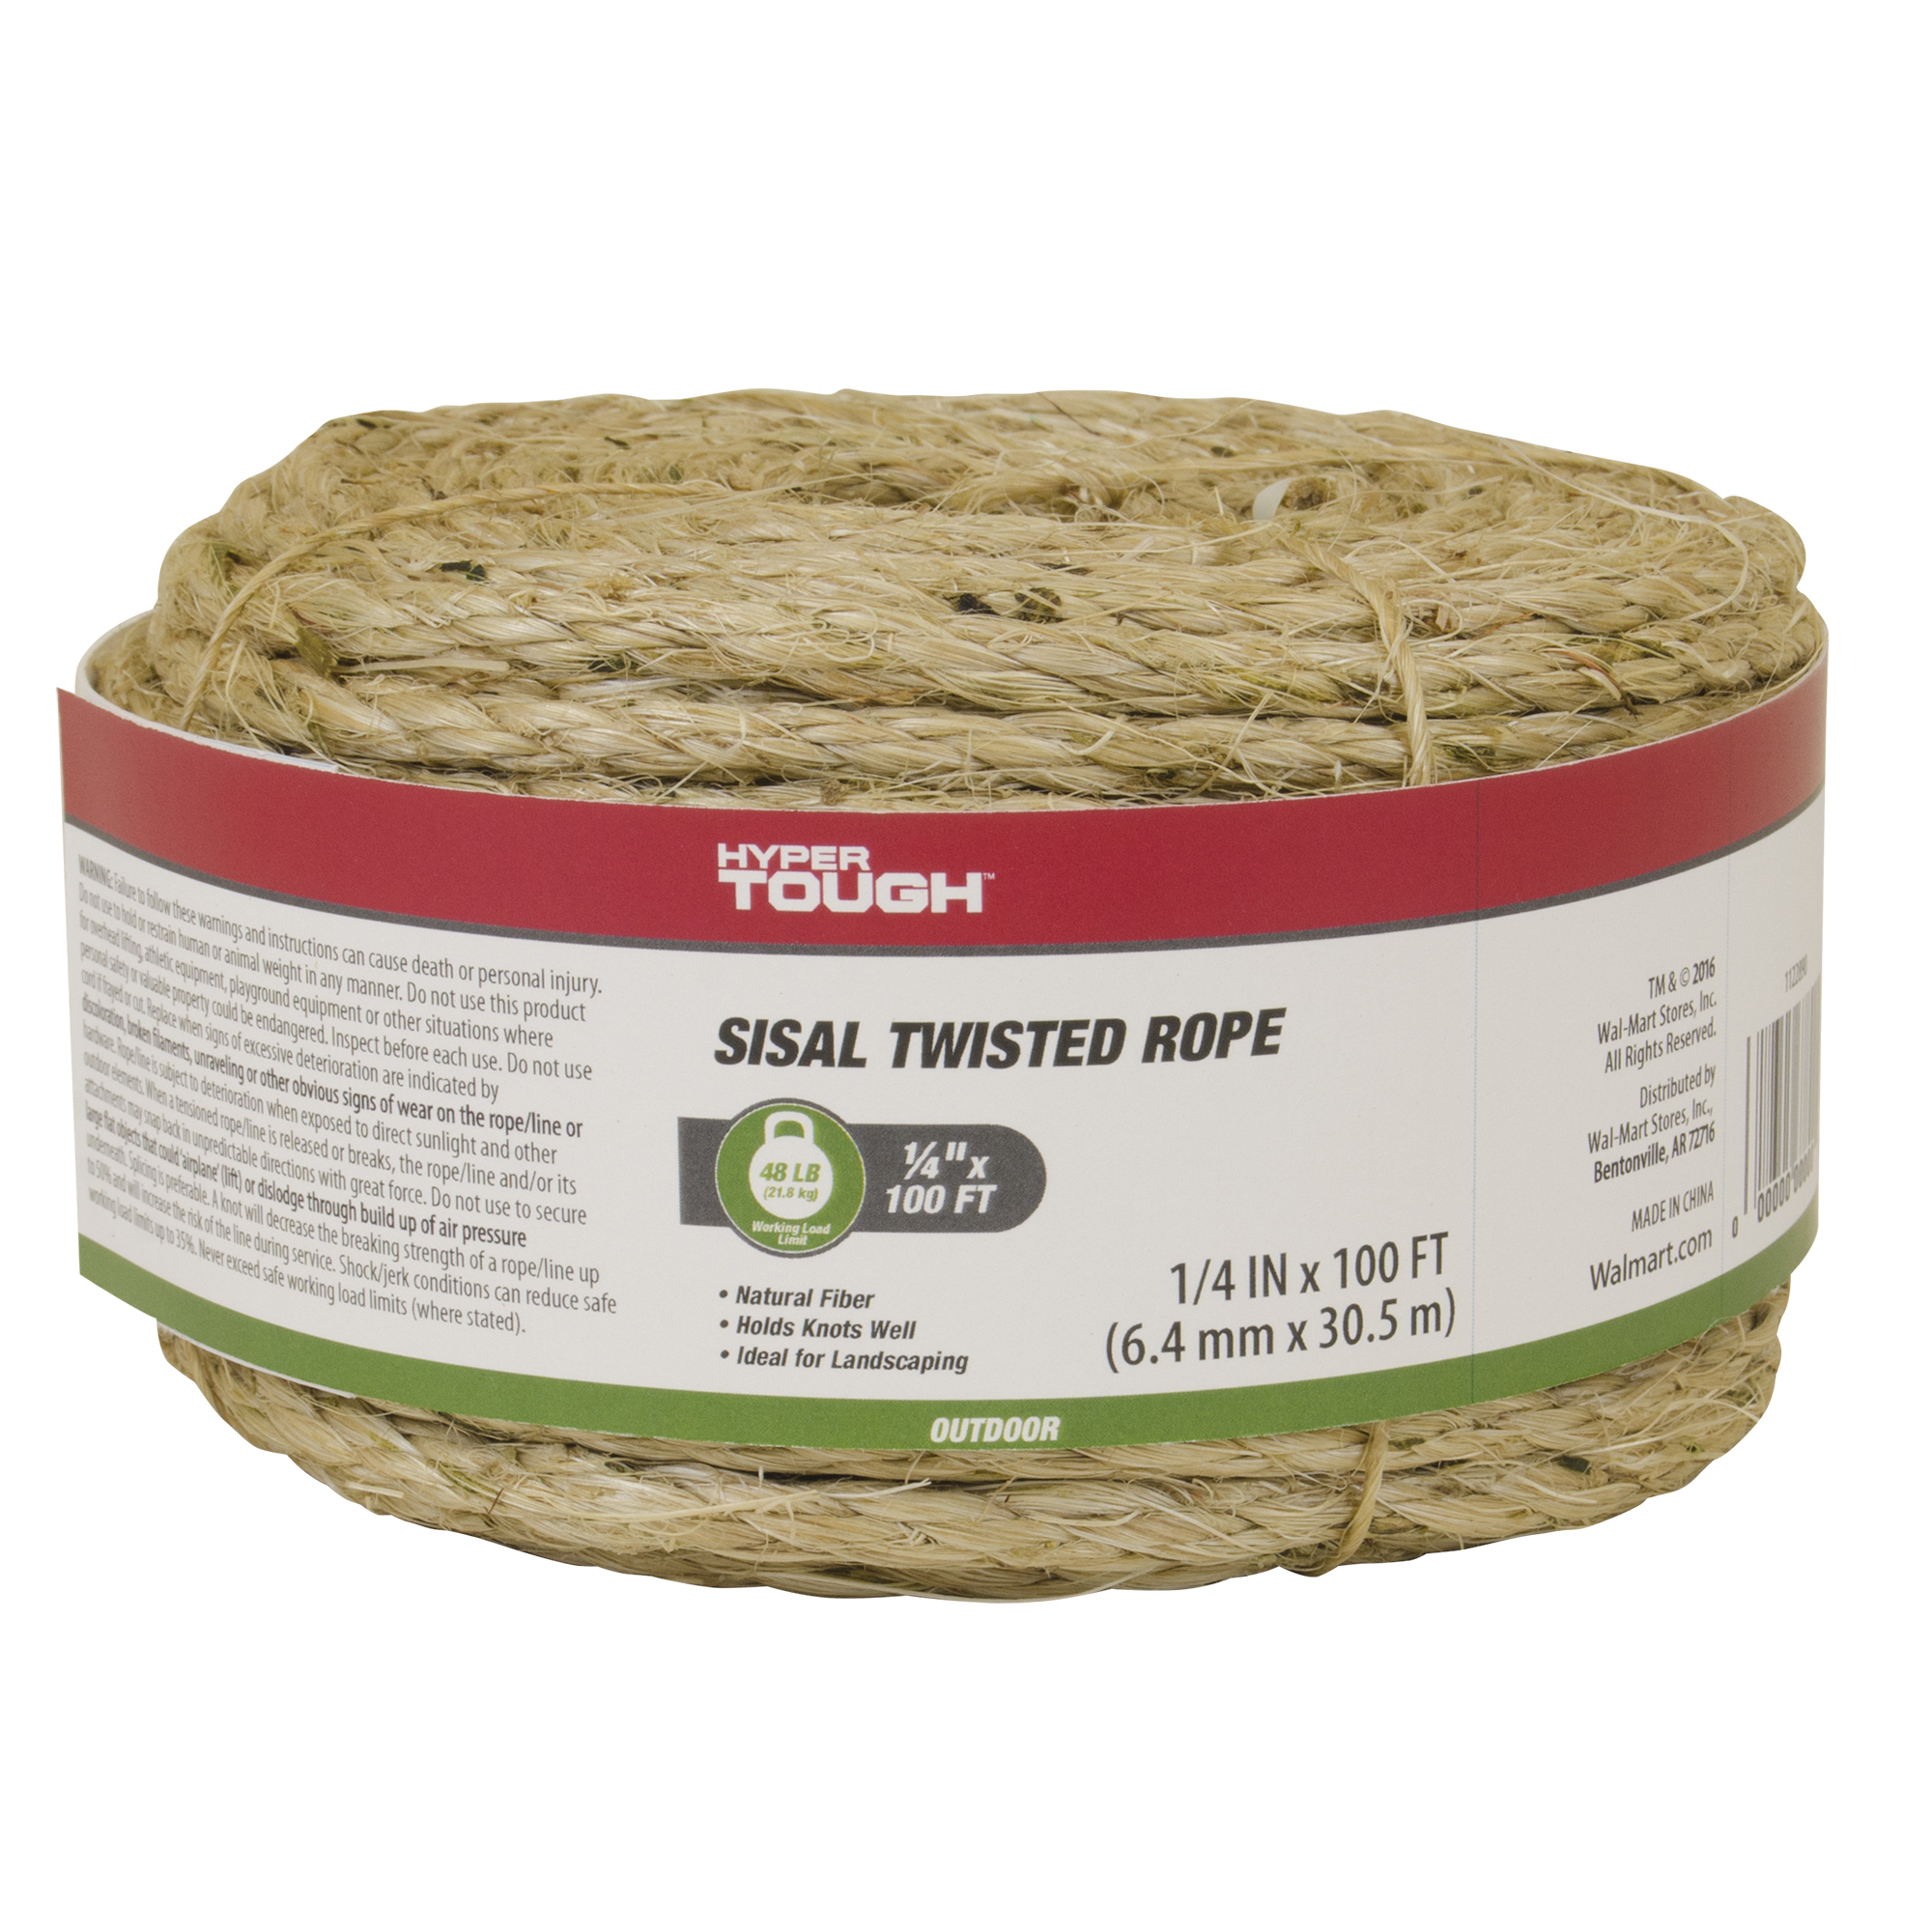 Hyper Tough 1/4" x 100' Sisal Twisted Rope, Beige - image 1 of 6